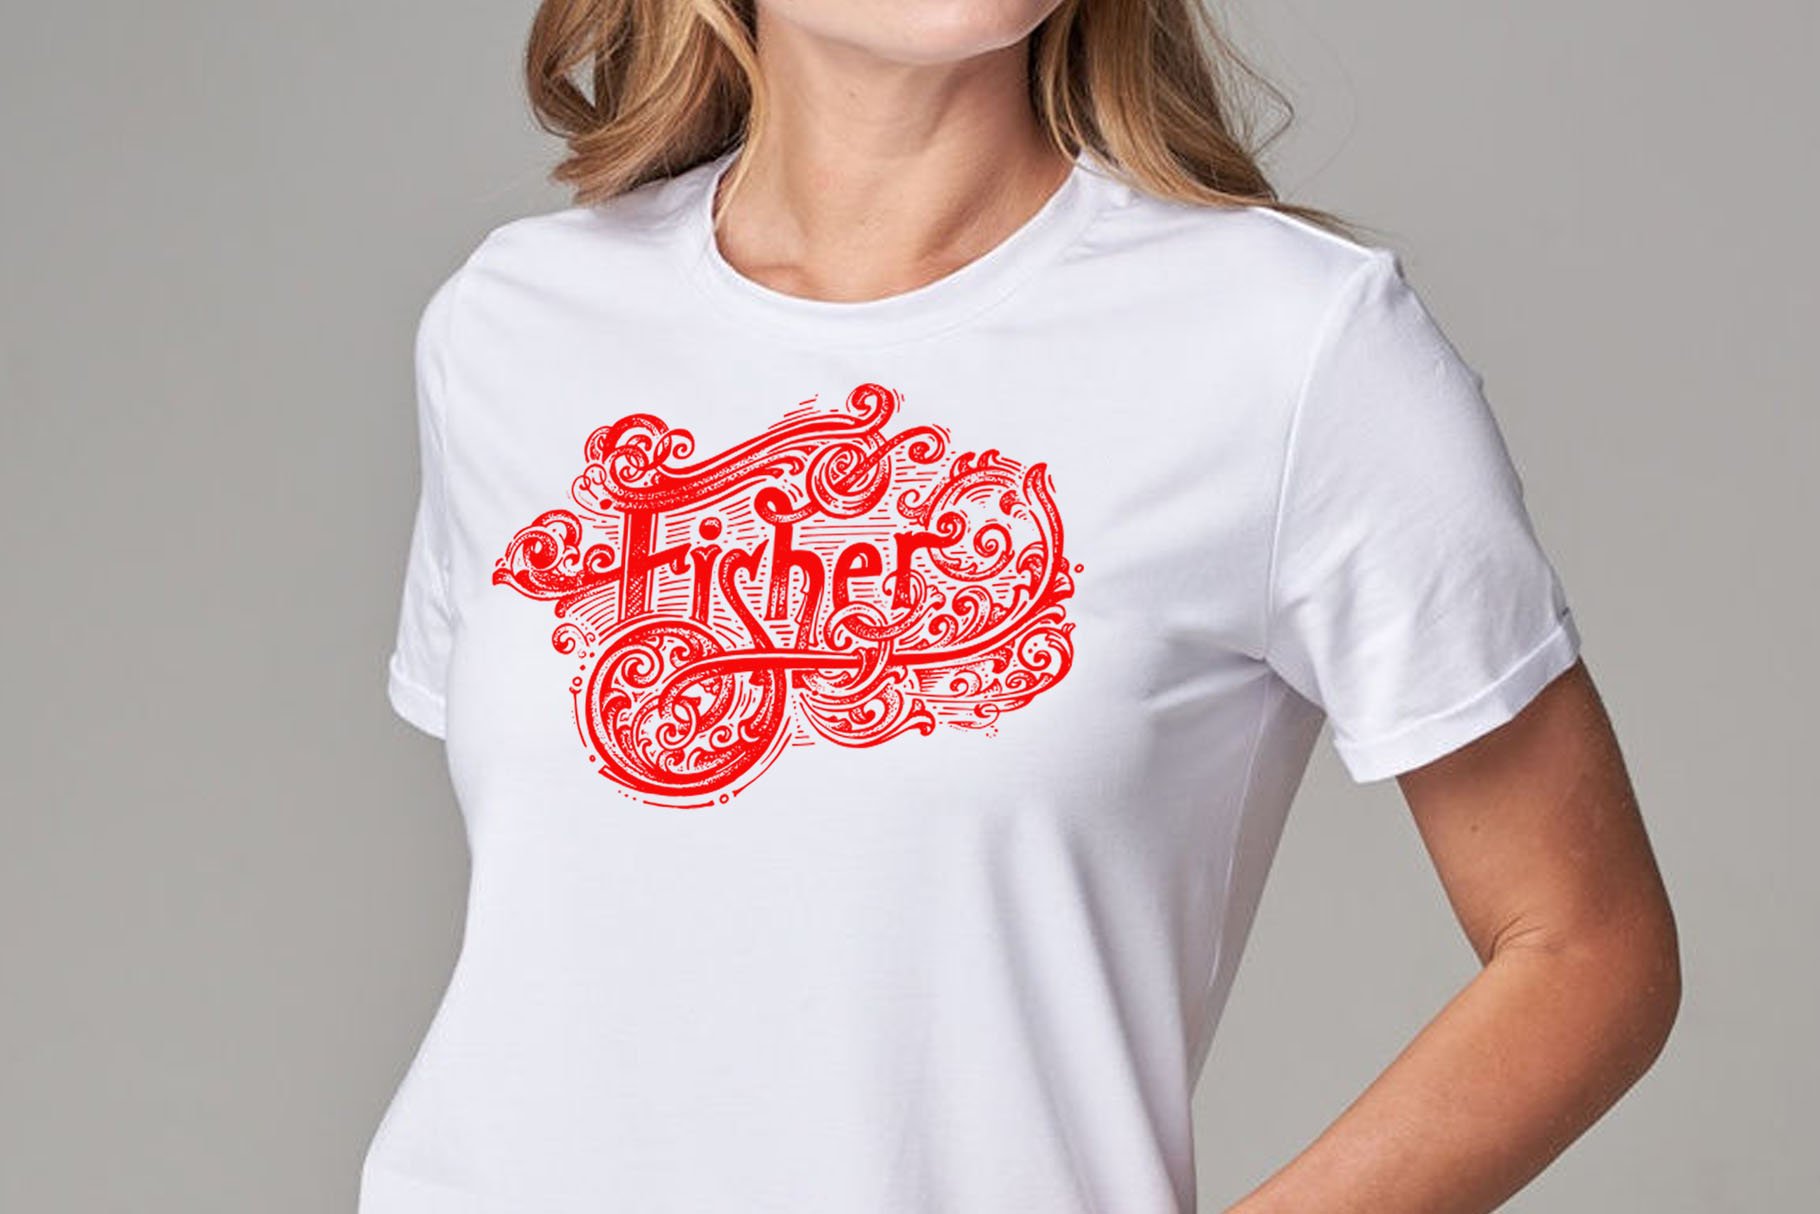 Classic white t-shirt with red fisher illustration.